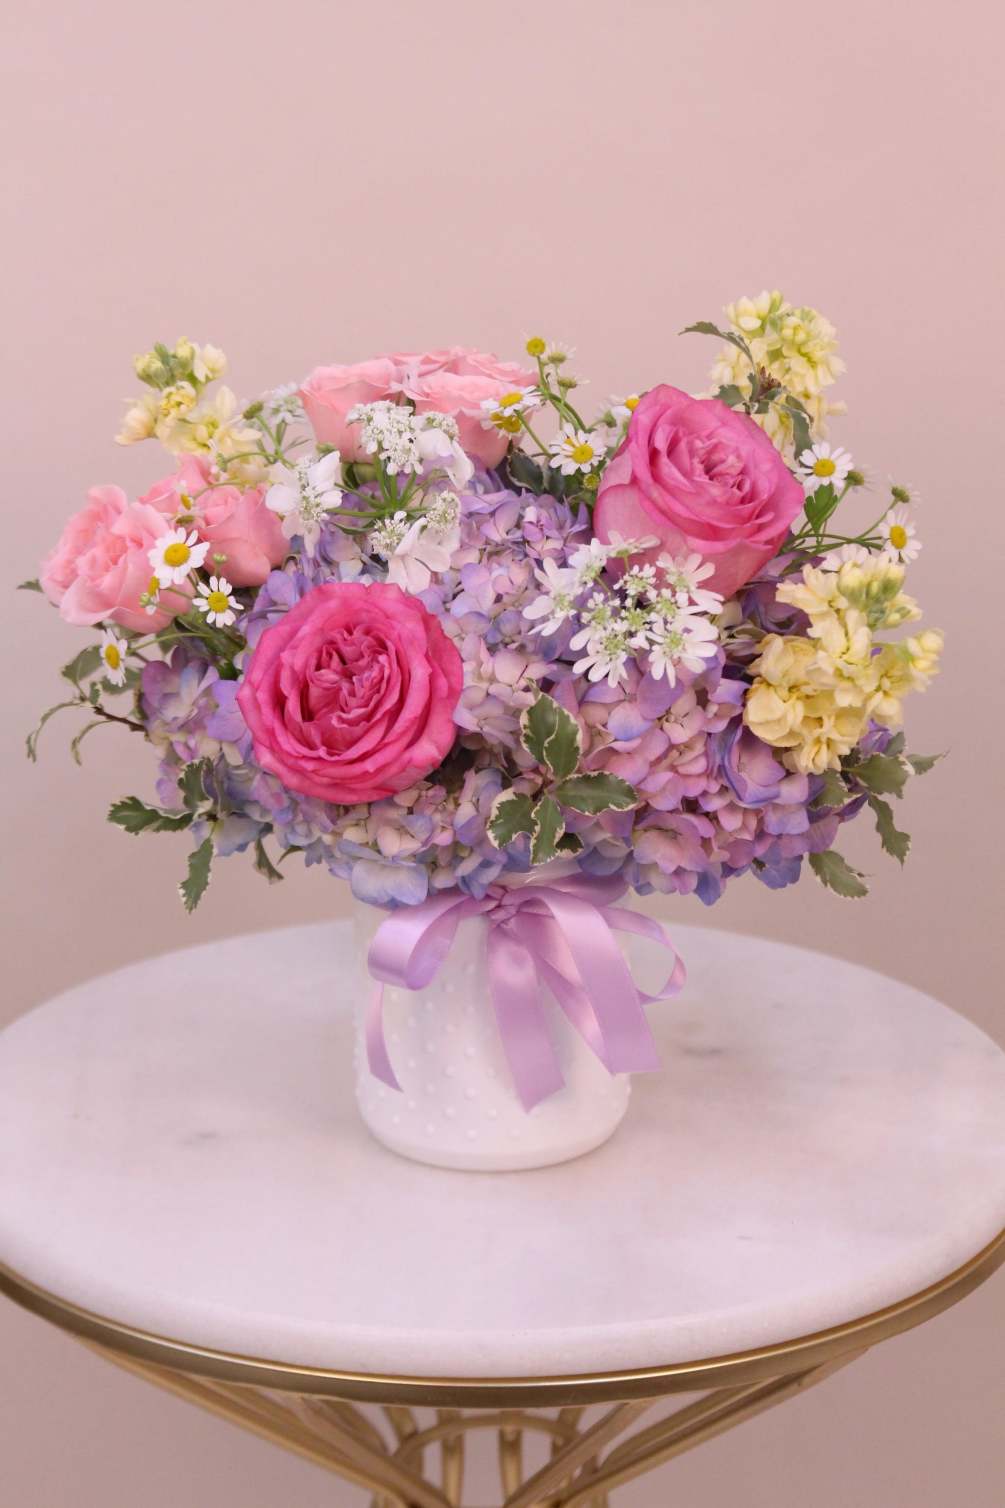 This beautiful arrangement of pastel flowers will surely delight your recipient. Flowers